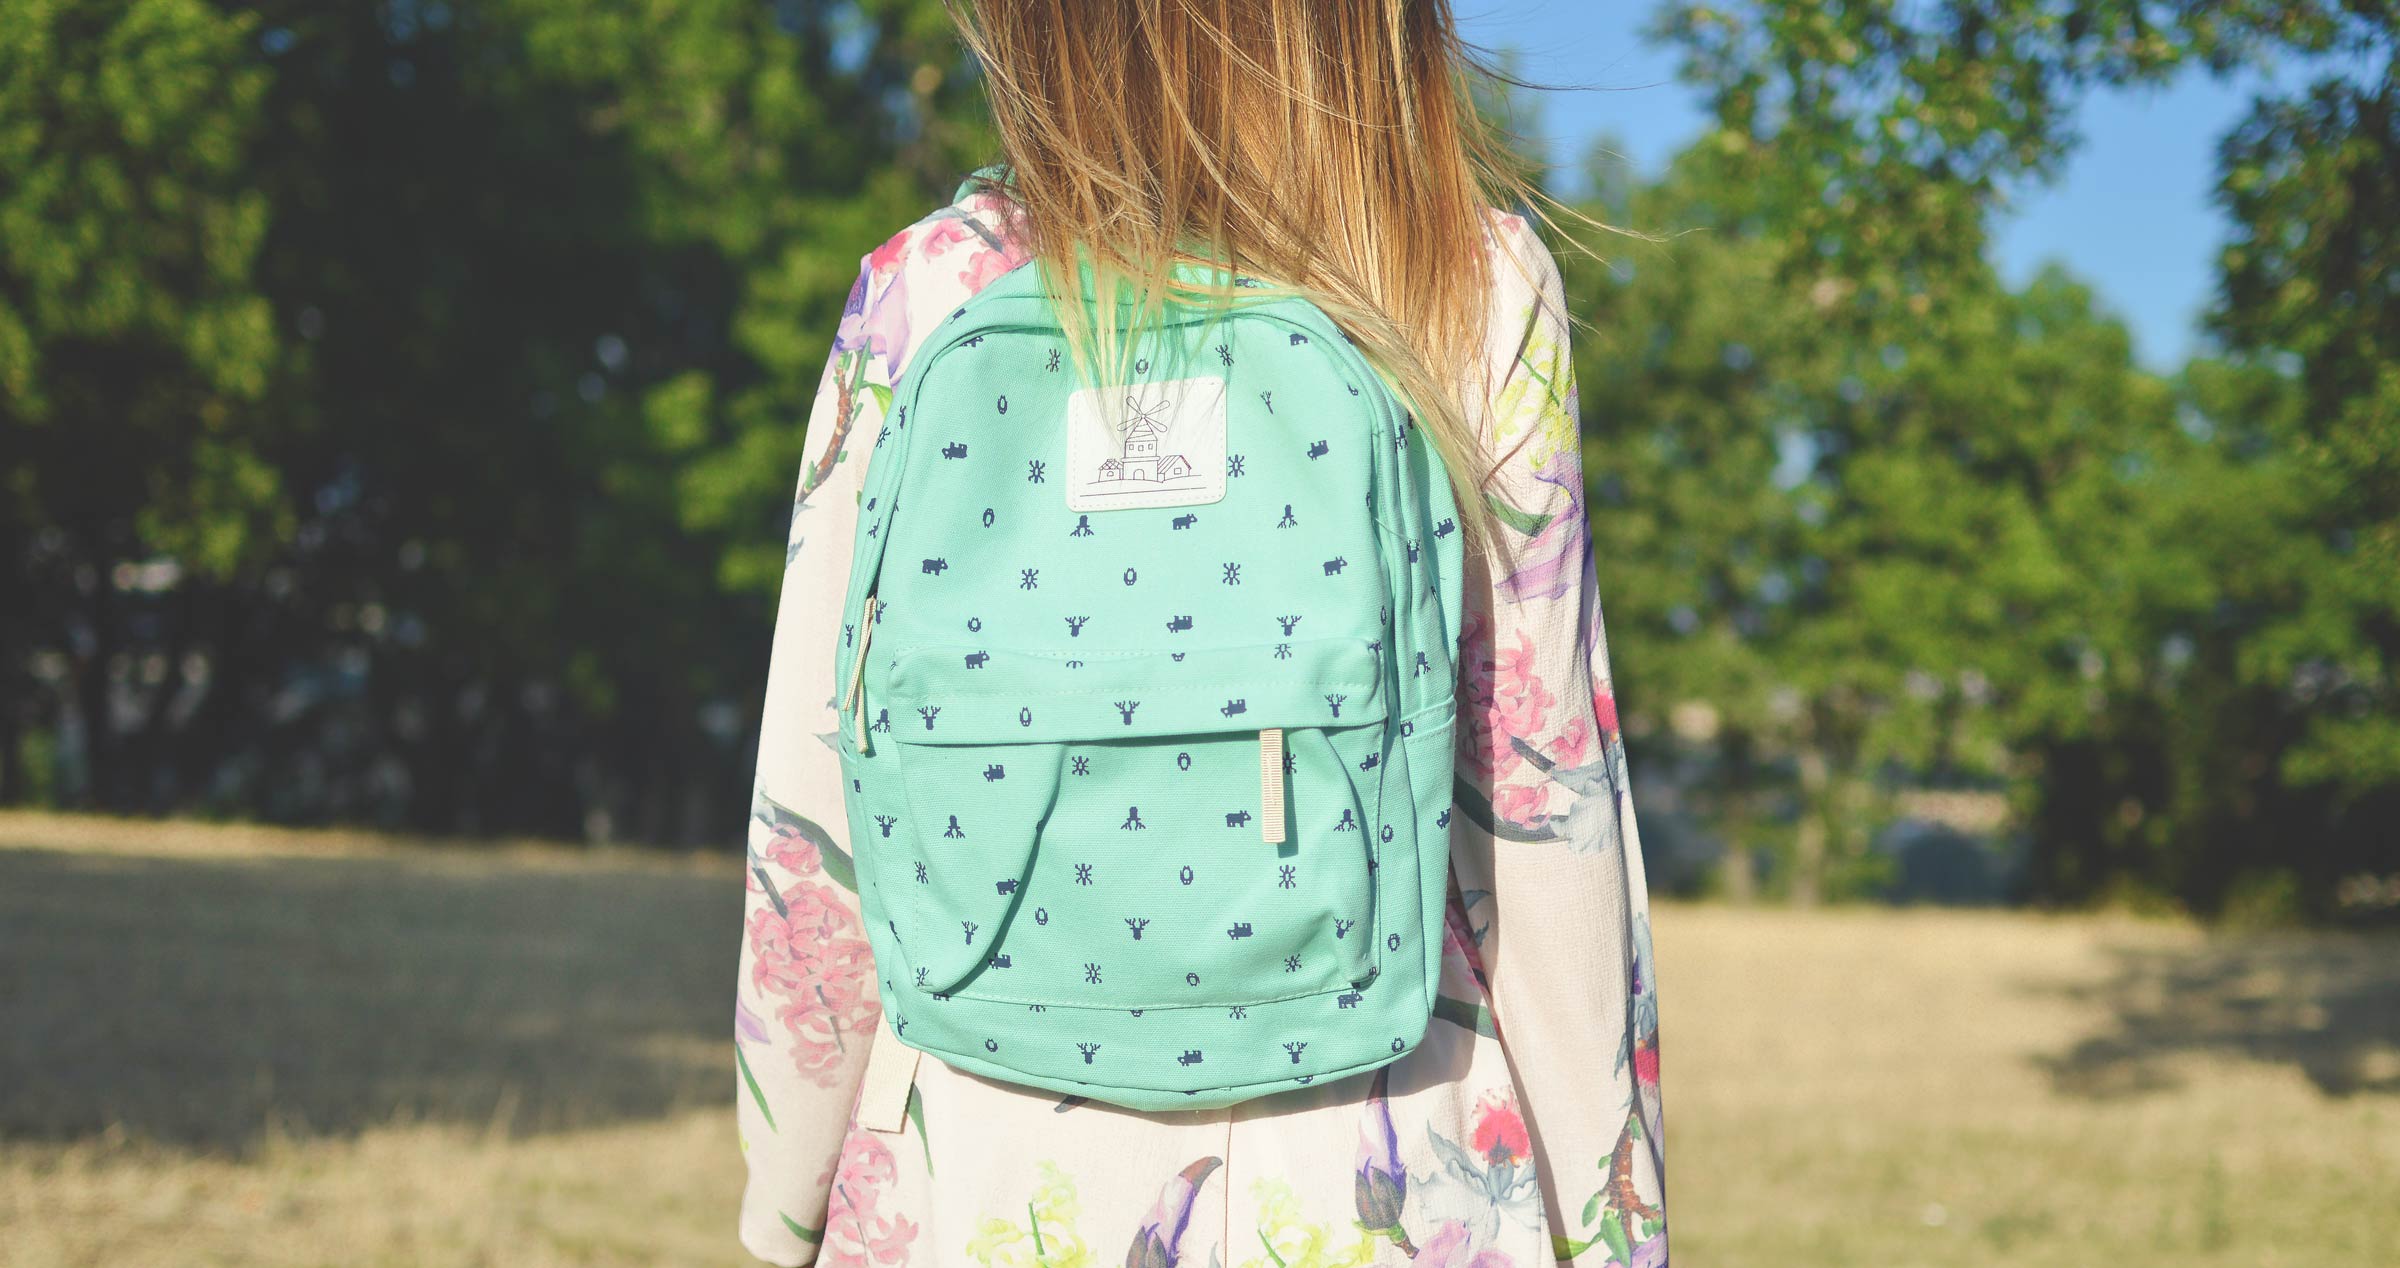 Backpack Round-up!